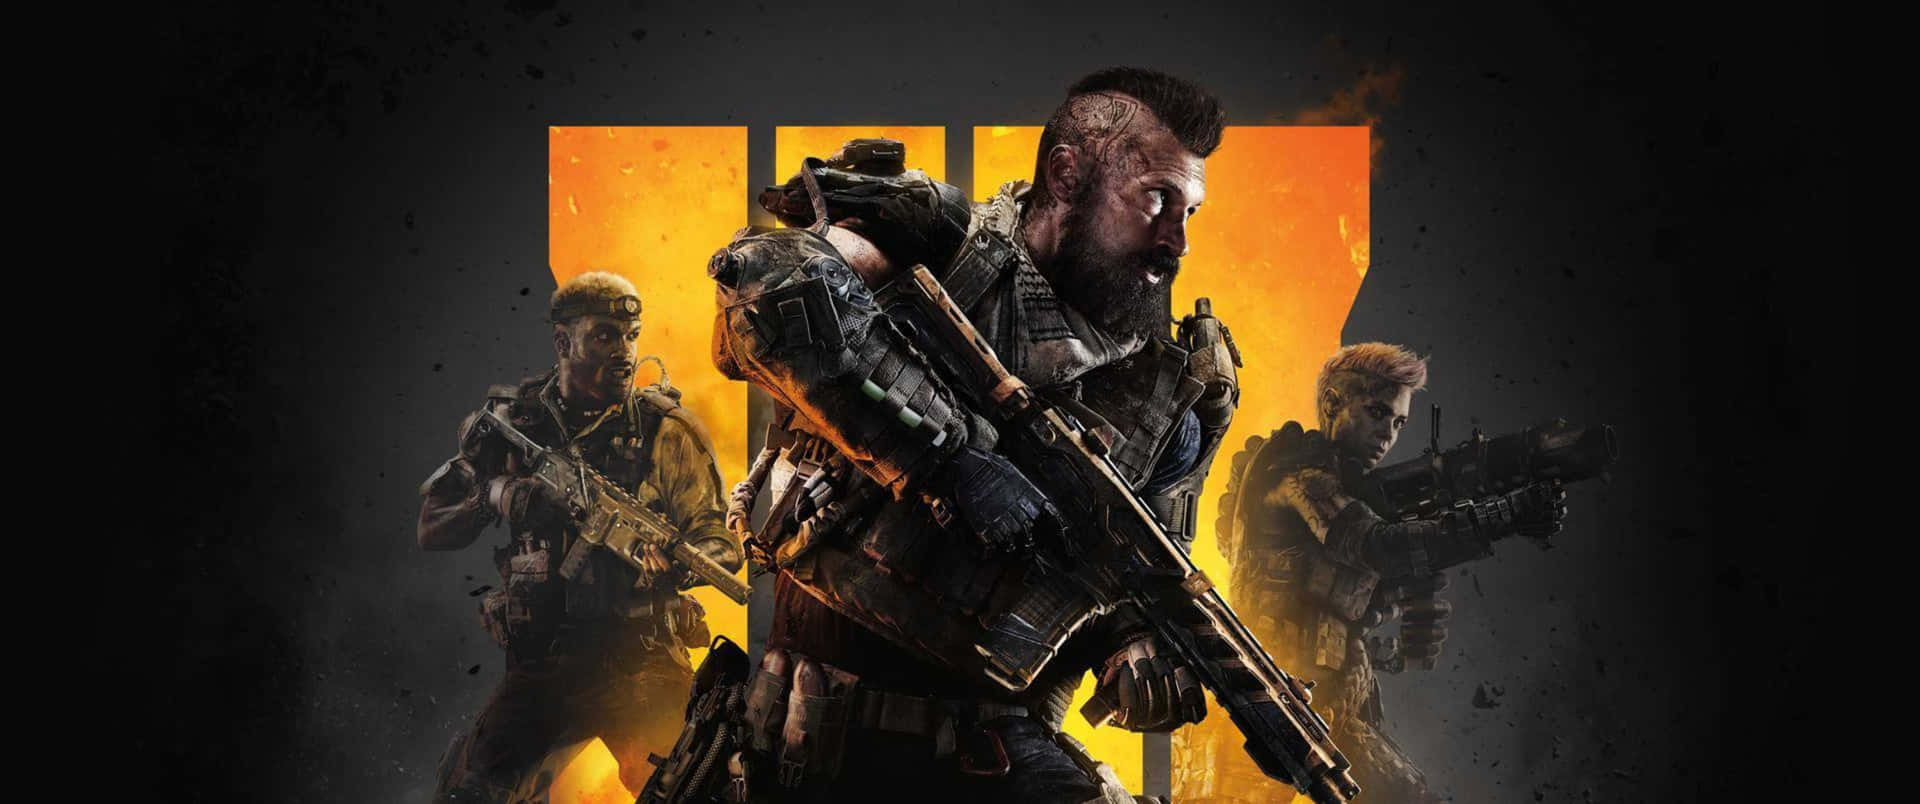 "Battle with Friends in Call of Duty: Black Ops 4"